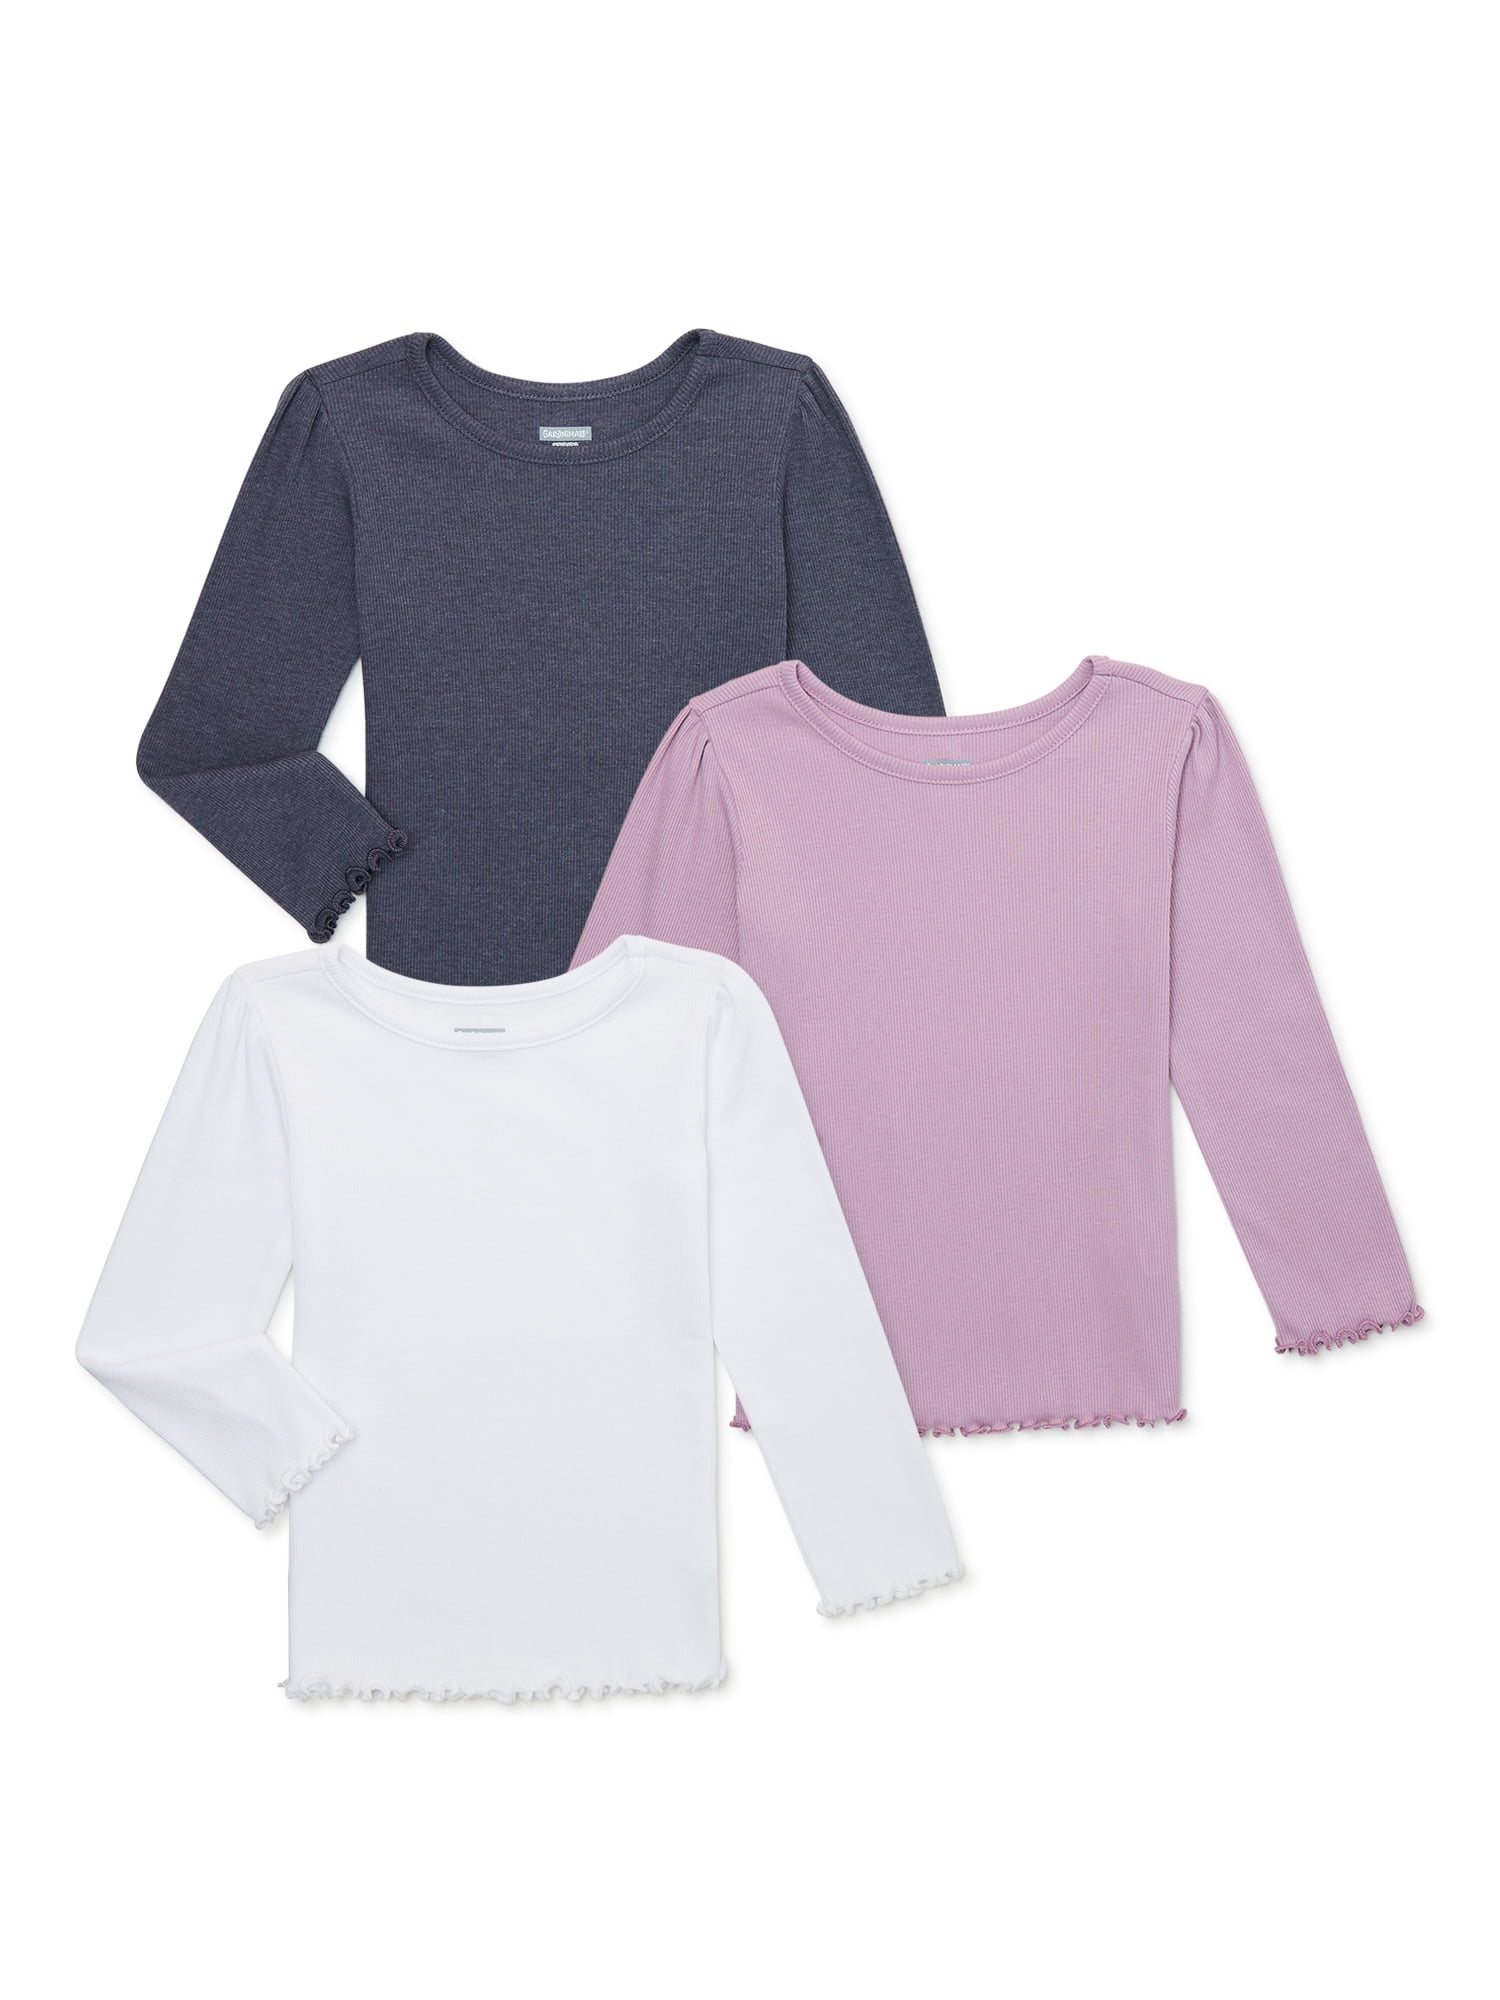 Garanimals Baby and Toddler Girls Ribbed Top with Long Sleeves, 3-Pack, Sizes 12M-5T - Walmart.com